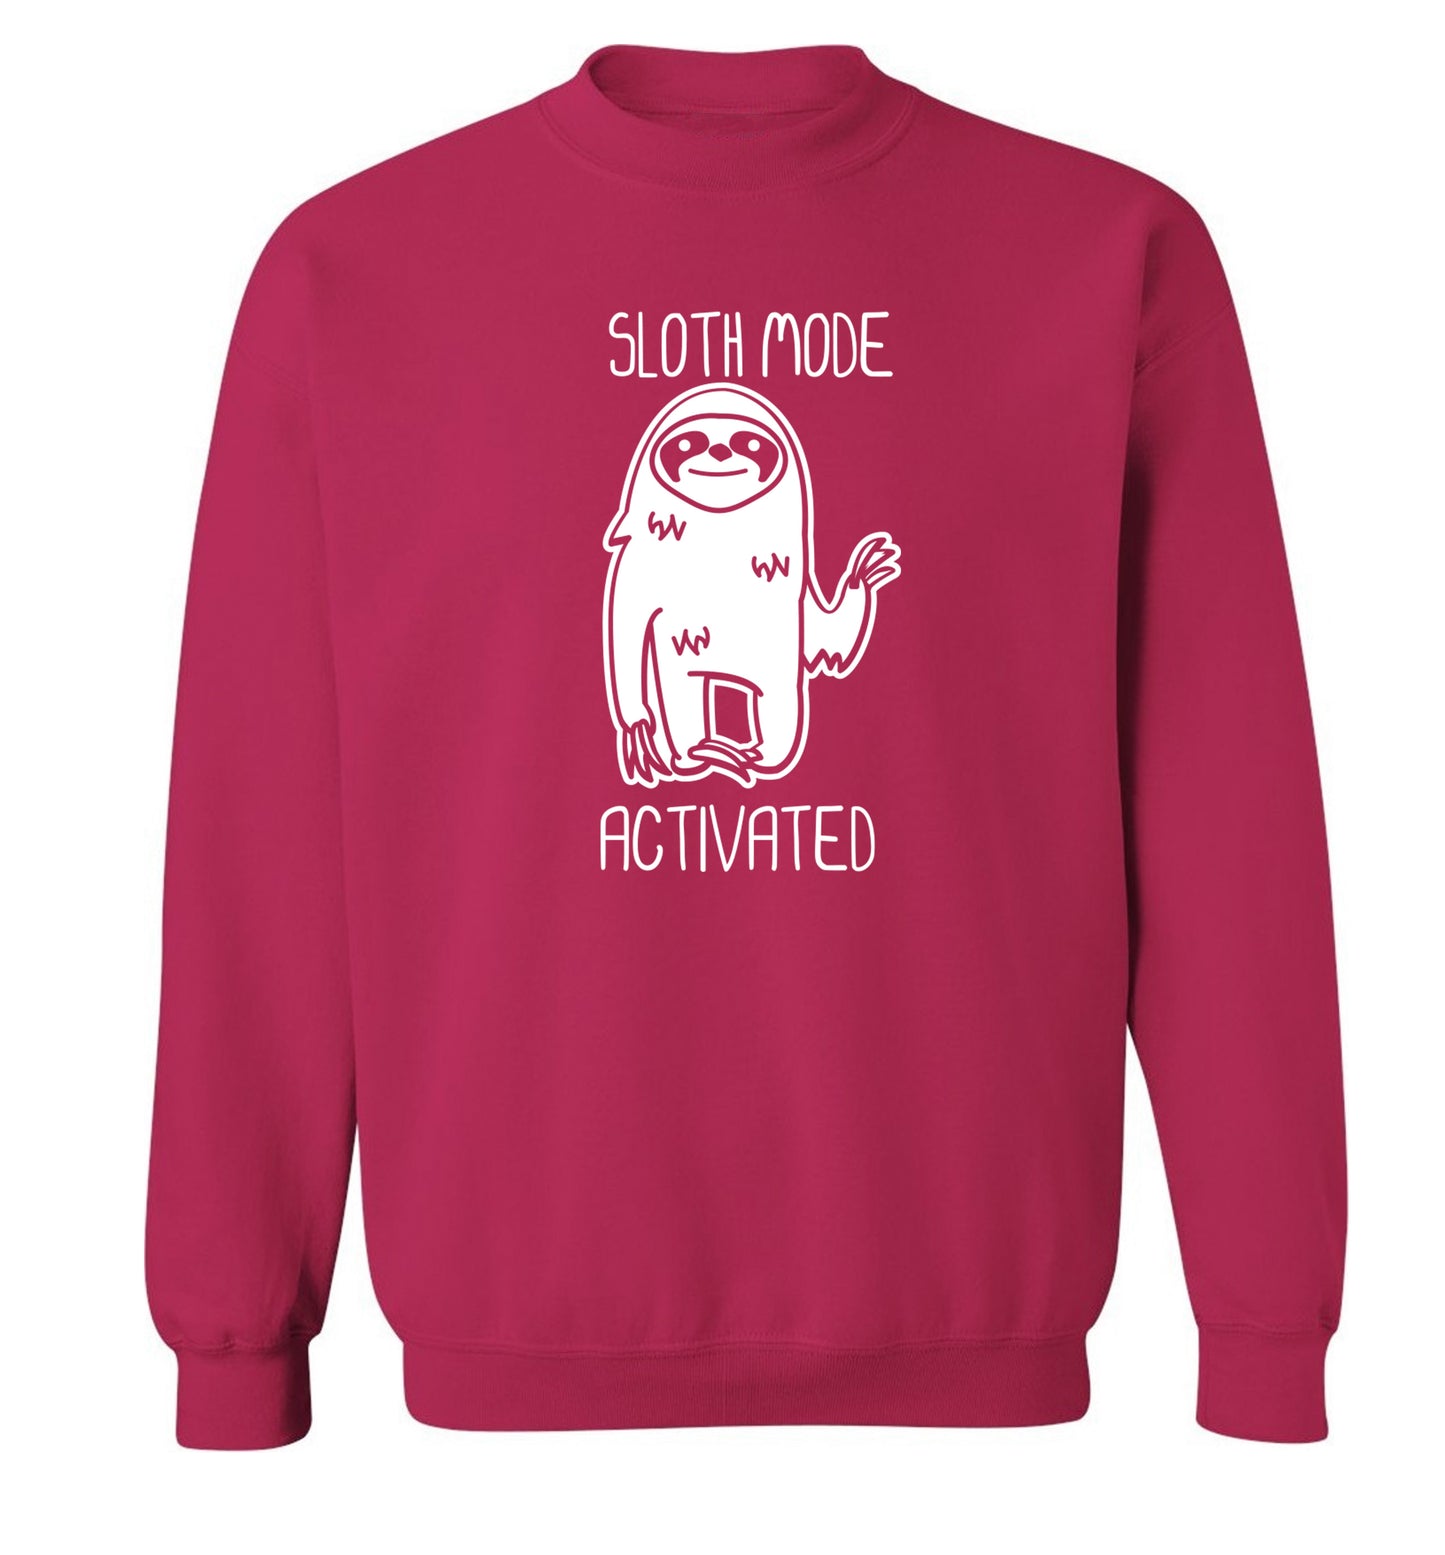 Sloth mode acitvated Adult's unisex pink Sweater 2XL